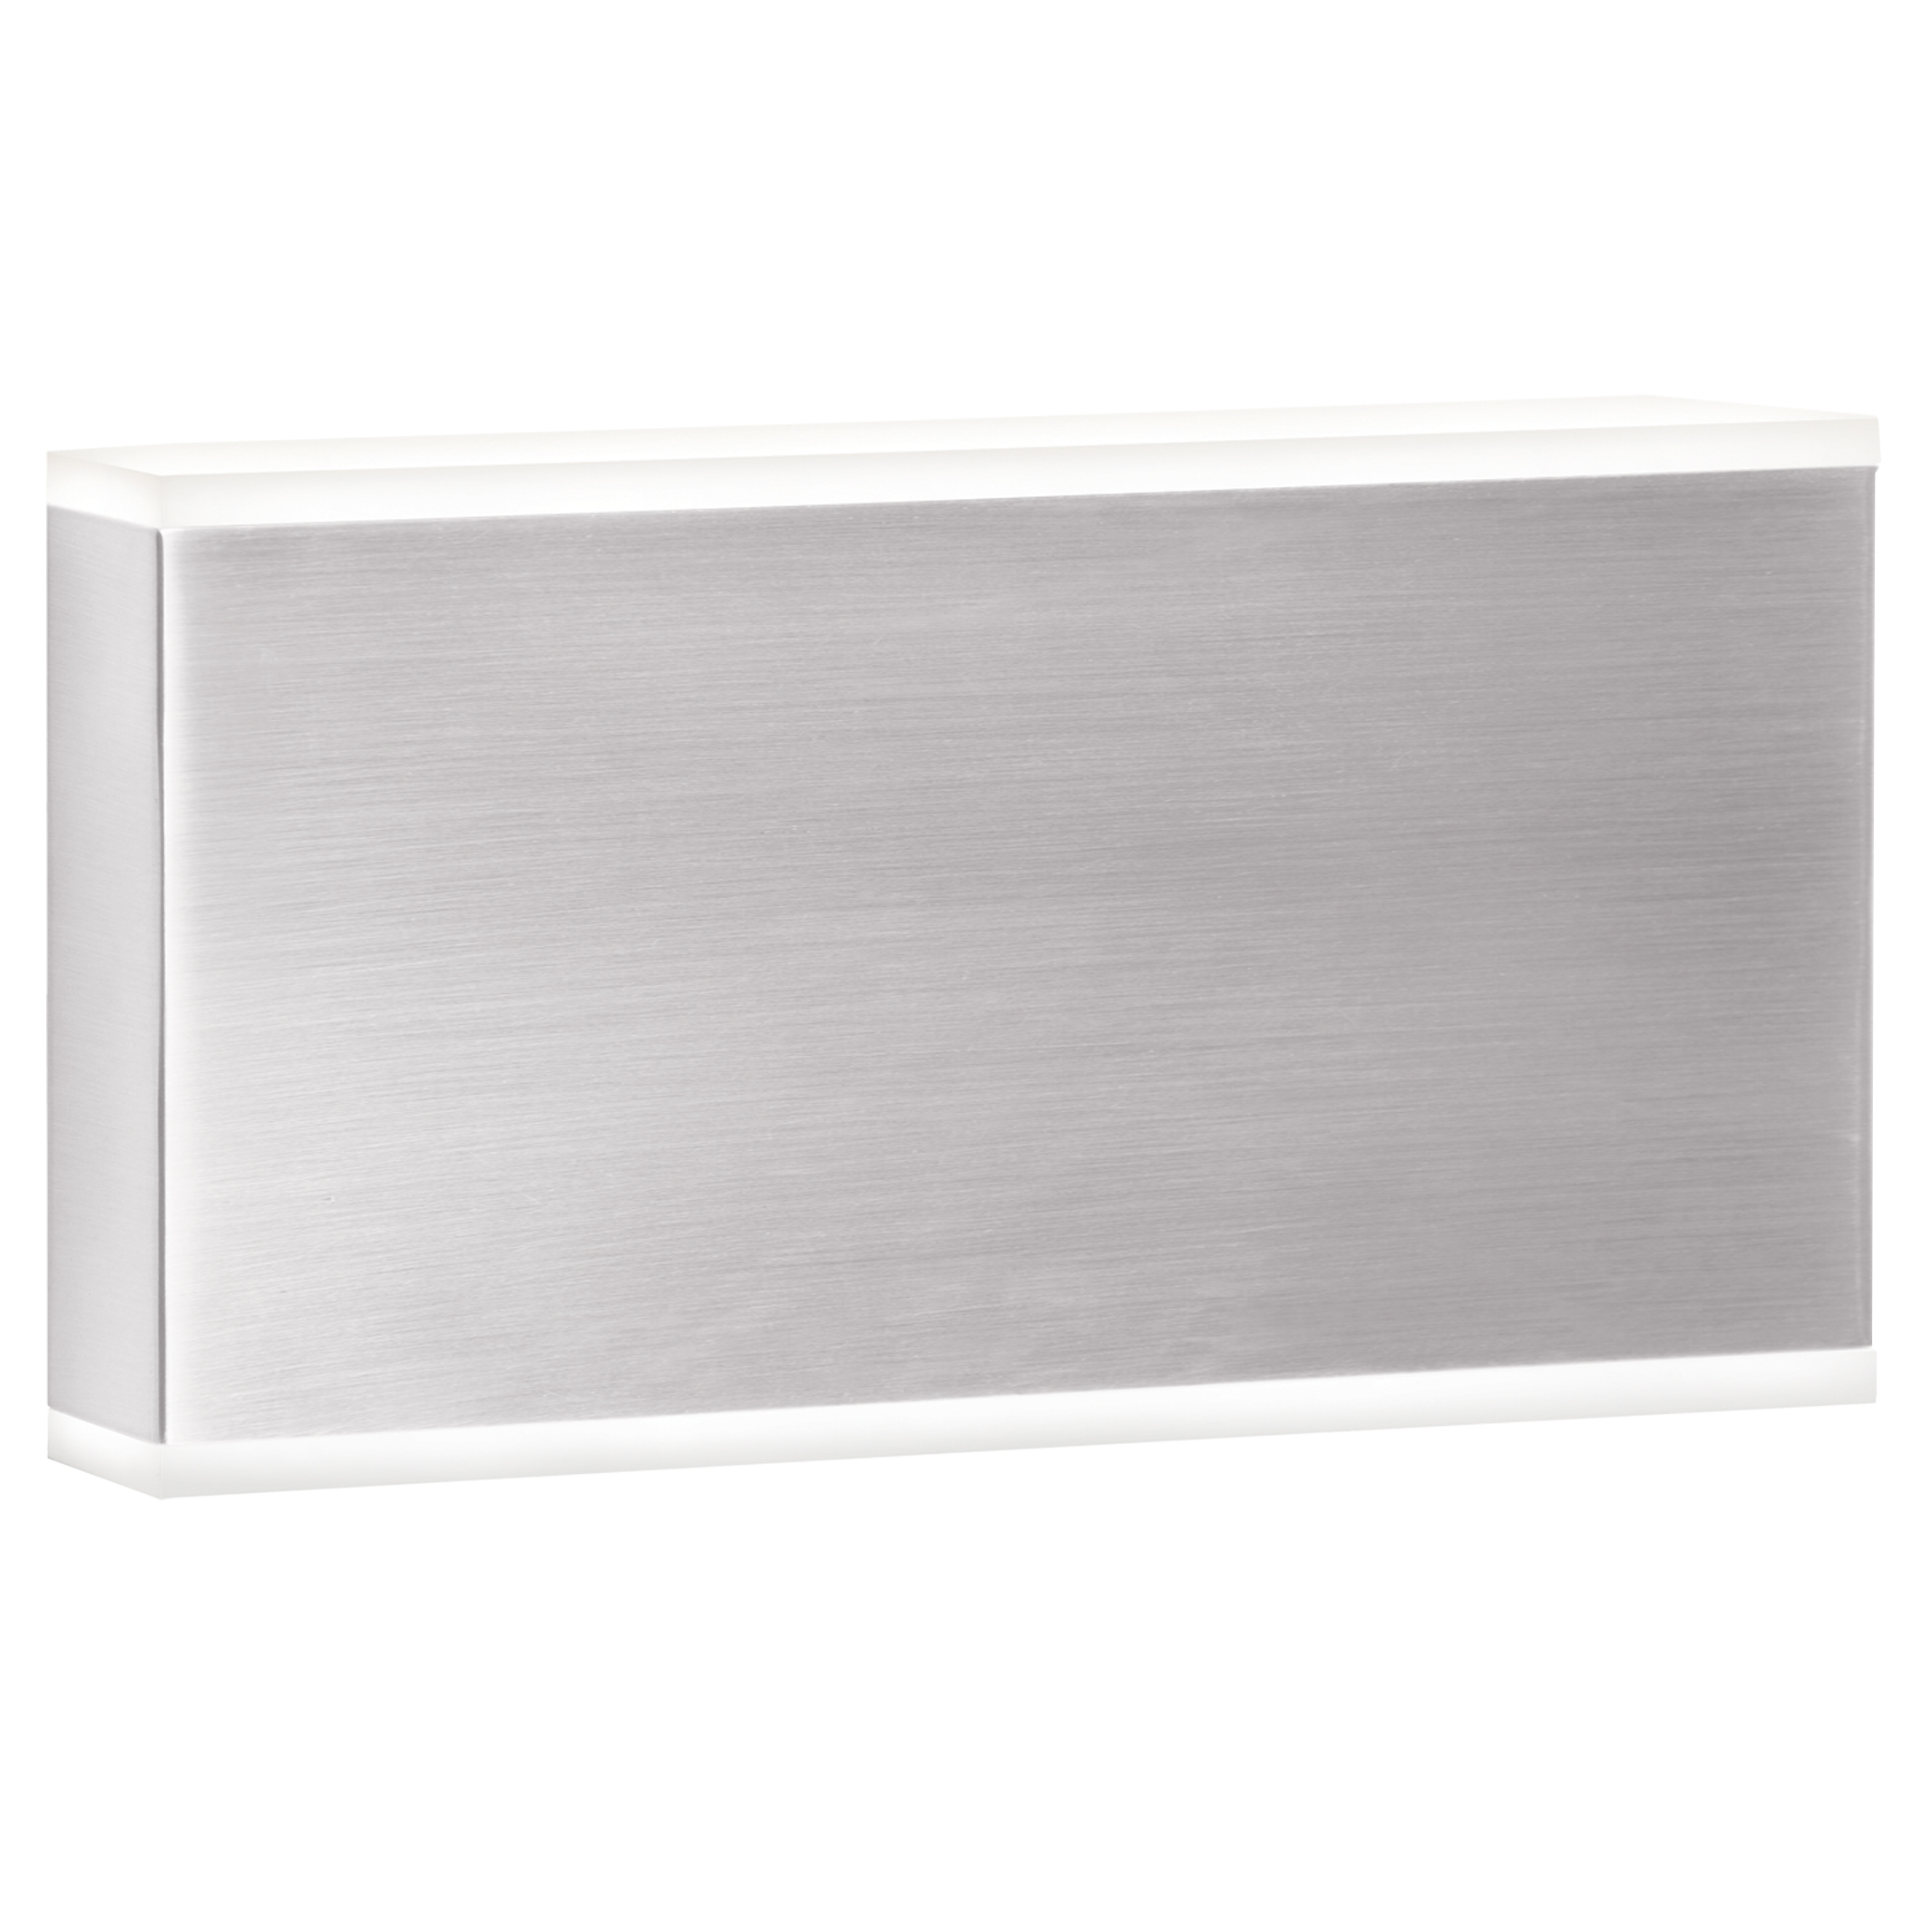 20W Wall Sconce, Satin Chrome with Frosted Acrylic Diffuser